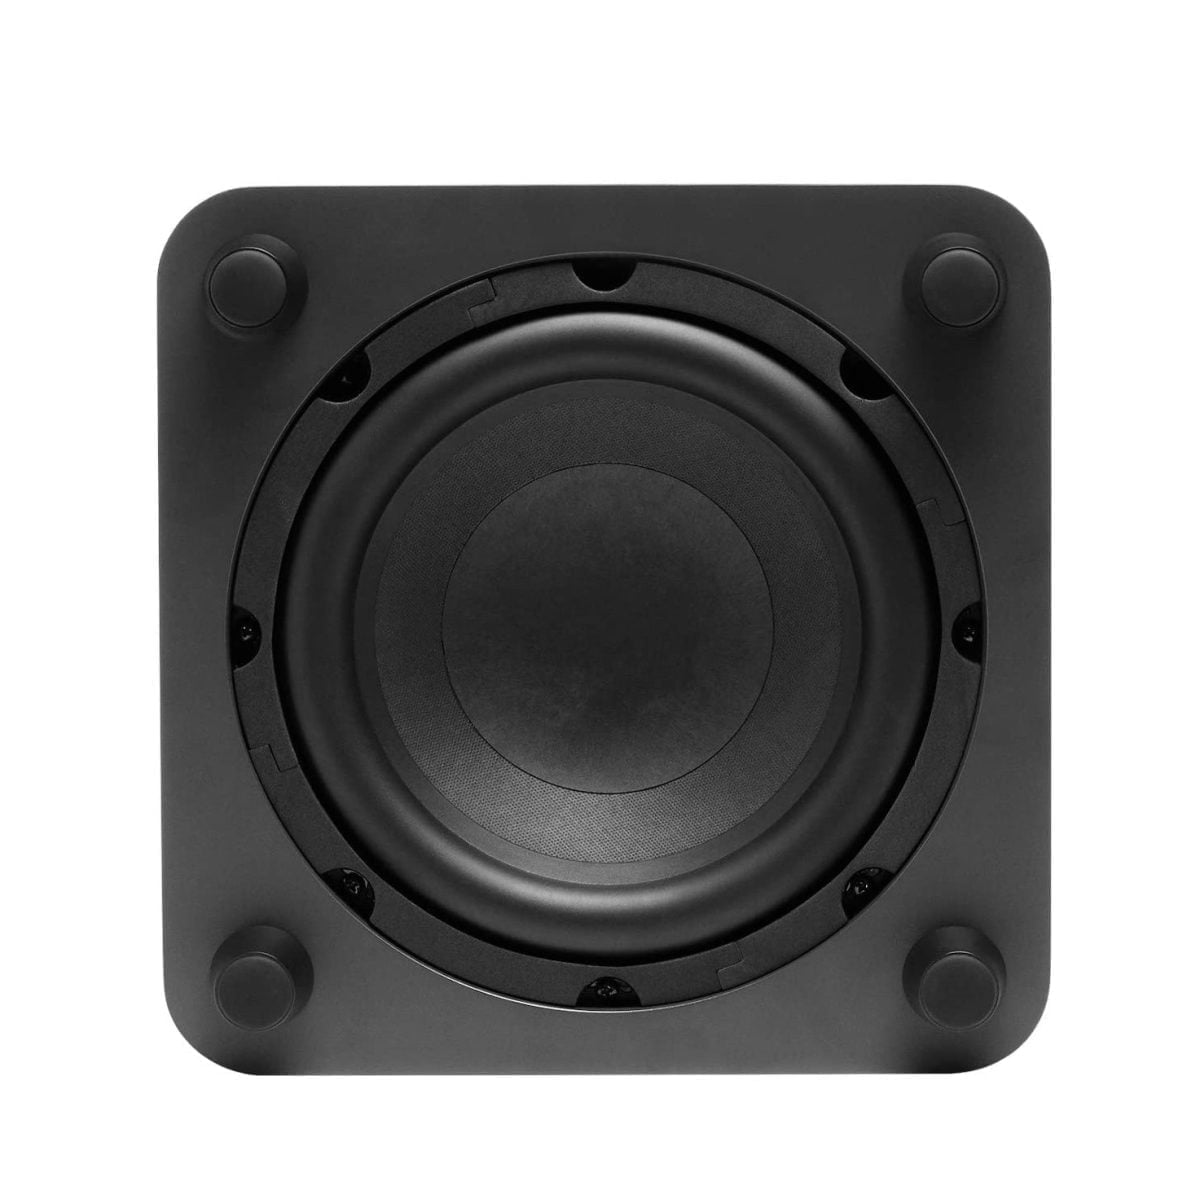 61Oosuicrel. Ac Sl1200 Jbl &Lt;H1&Gt;Jbl Bar 9.1 True Wireless Surround With Dolby Atmos&Lt;/H1&Gt; Https://Www.youtube.com/Watch?V=Wqyzdx2-Nne Upgrade Your Home Theater With This Jbl Bar 9.1-Channel Jbl Soundbar System. The Powerful 820W Output Offers An Immersive Movie And Music Experience, While Bluetooth, Airplay 2 And Chromecast Connectivity Lets You Stream Audio Smoothly. This Jbl Bar 9.1-Channel Soundbar System Has Detachable Speakers With Rechargeable Batteries For Flexible Placement, And Dolby Atmos Technology Delivers Quality Surround Sound. Jbl Soundbar Jbl Bar 9.1 True Wireless Surround With Dolby Atmos Soundbar